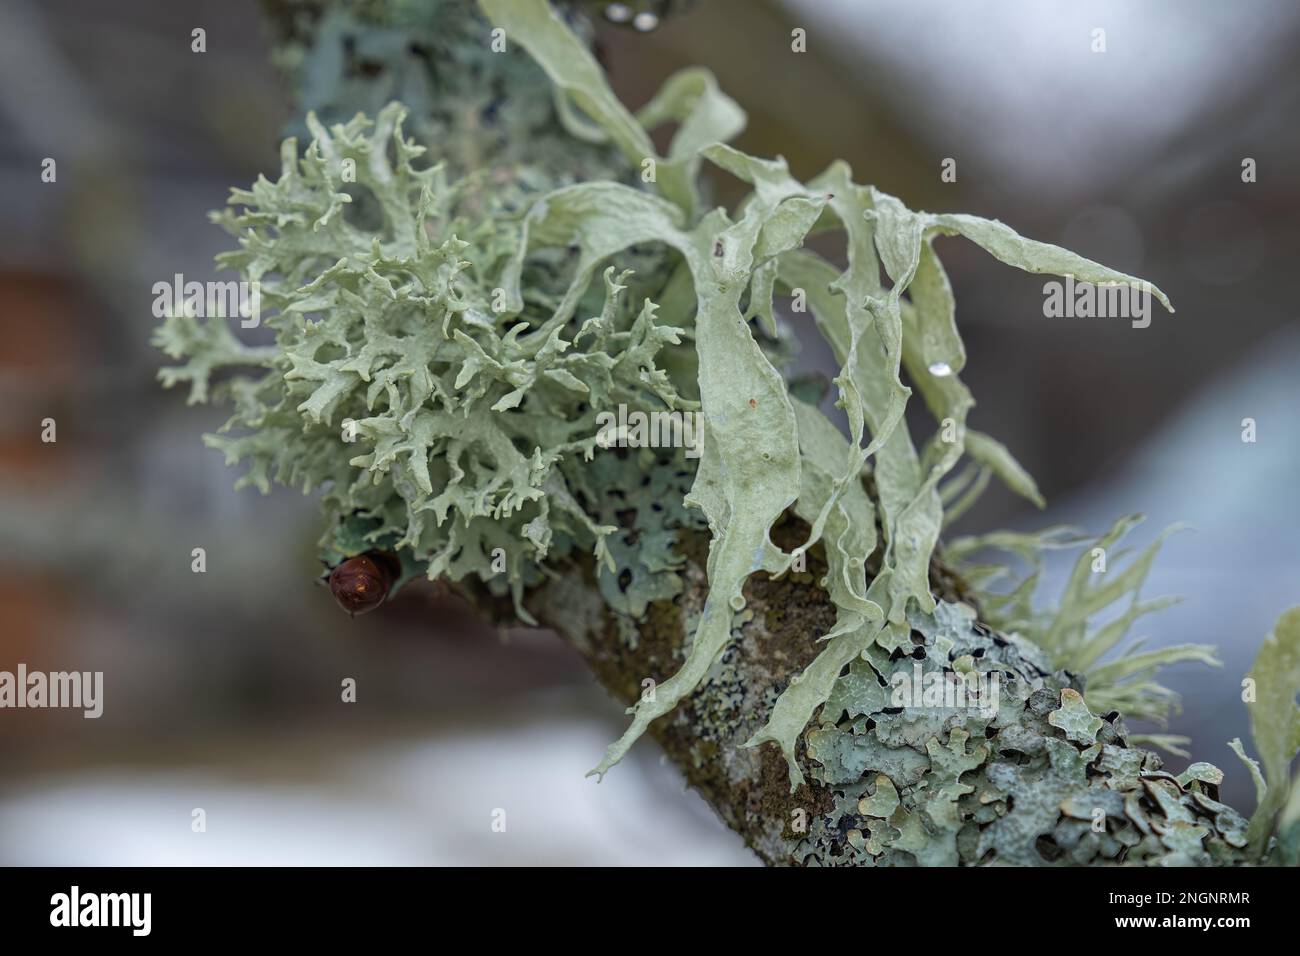 lichen of two types on a tree branch. An old chestnut tree branch. Stock Photo